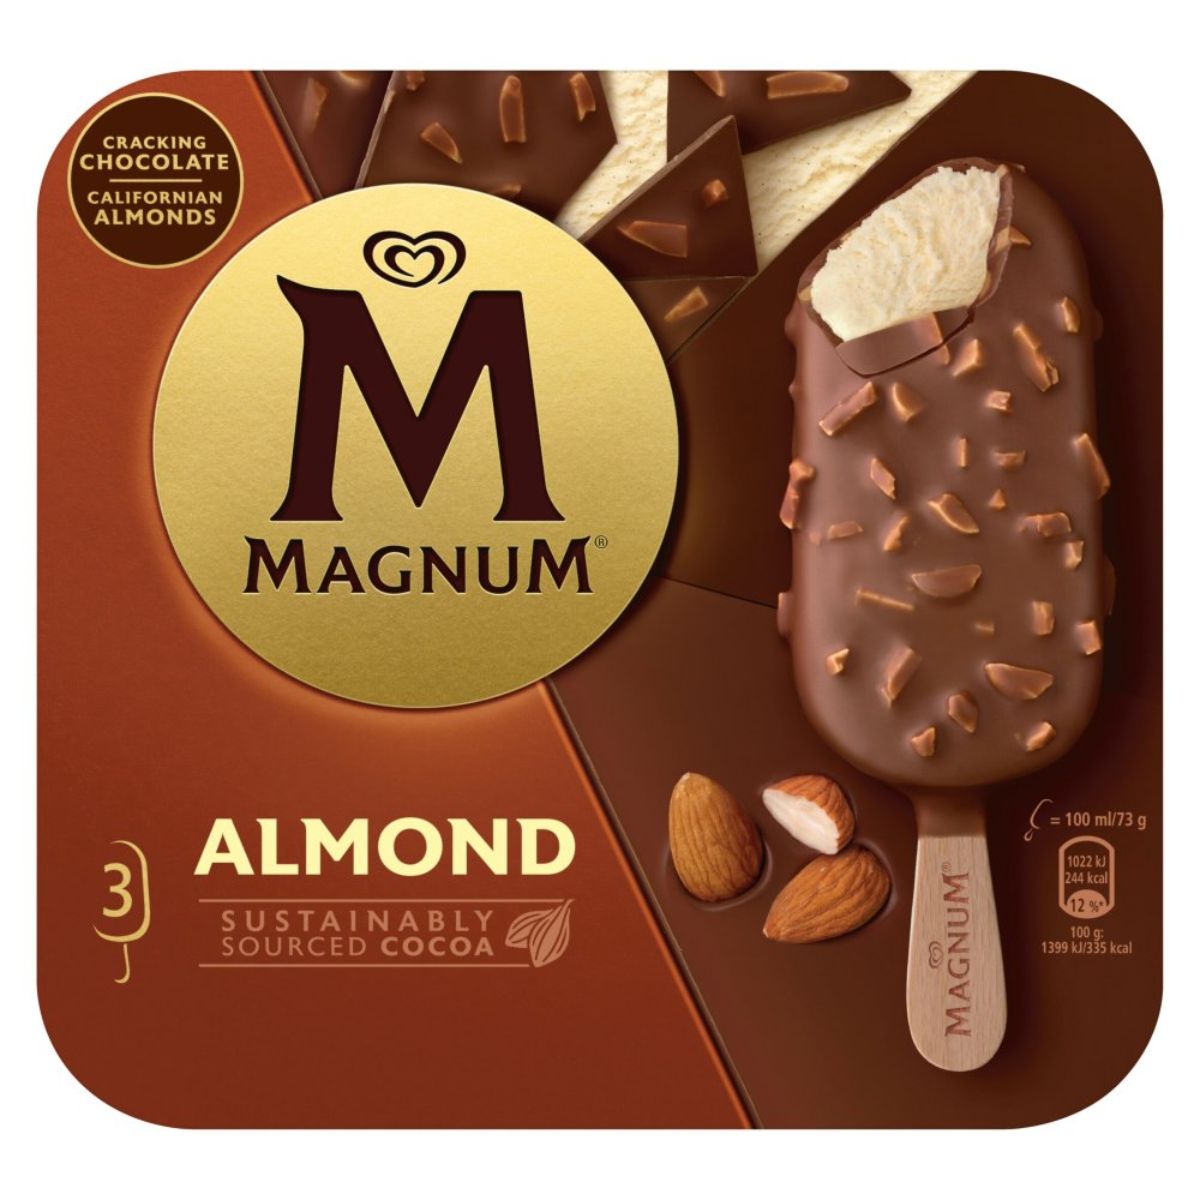 A Magnum Almond Ice Cream Stick with almonds and chocolate pieces showcasing the packaging with logo and nutritional information.